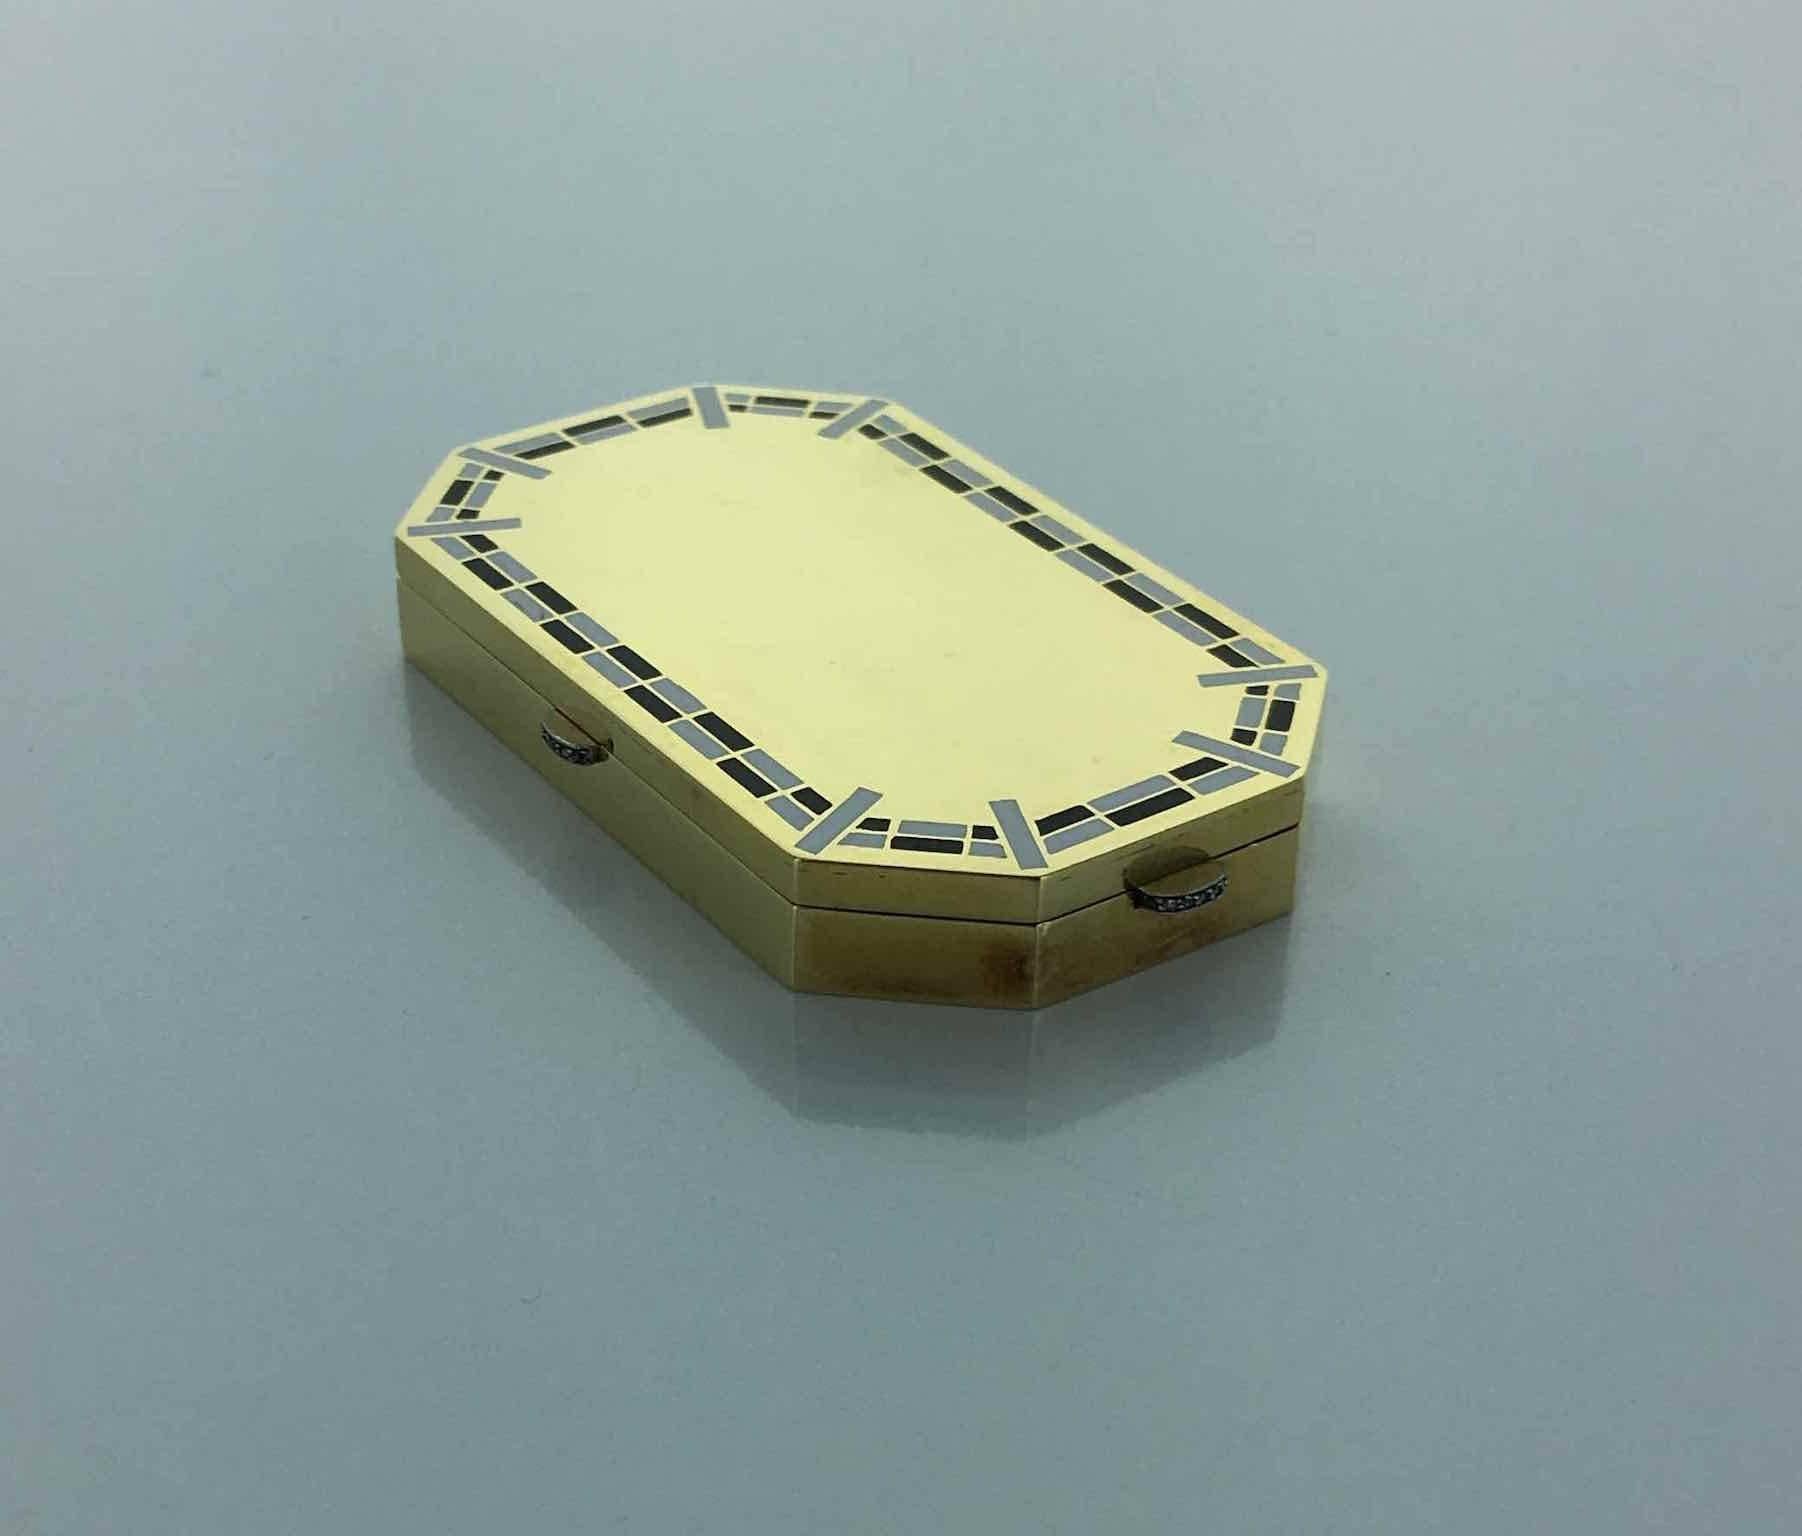 French Art Deco small Minaudiere in 18k gold 750 enameled by black and white geometric motifs on the top. Inside a mirror. Opening buttons punctuated by rose cut diamond. Circa 1930
Signed Janesich, numbered
French marks
Gross weight: 93.90 g.